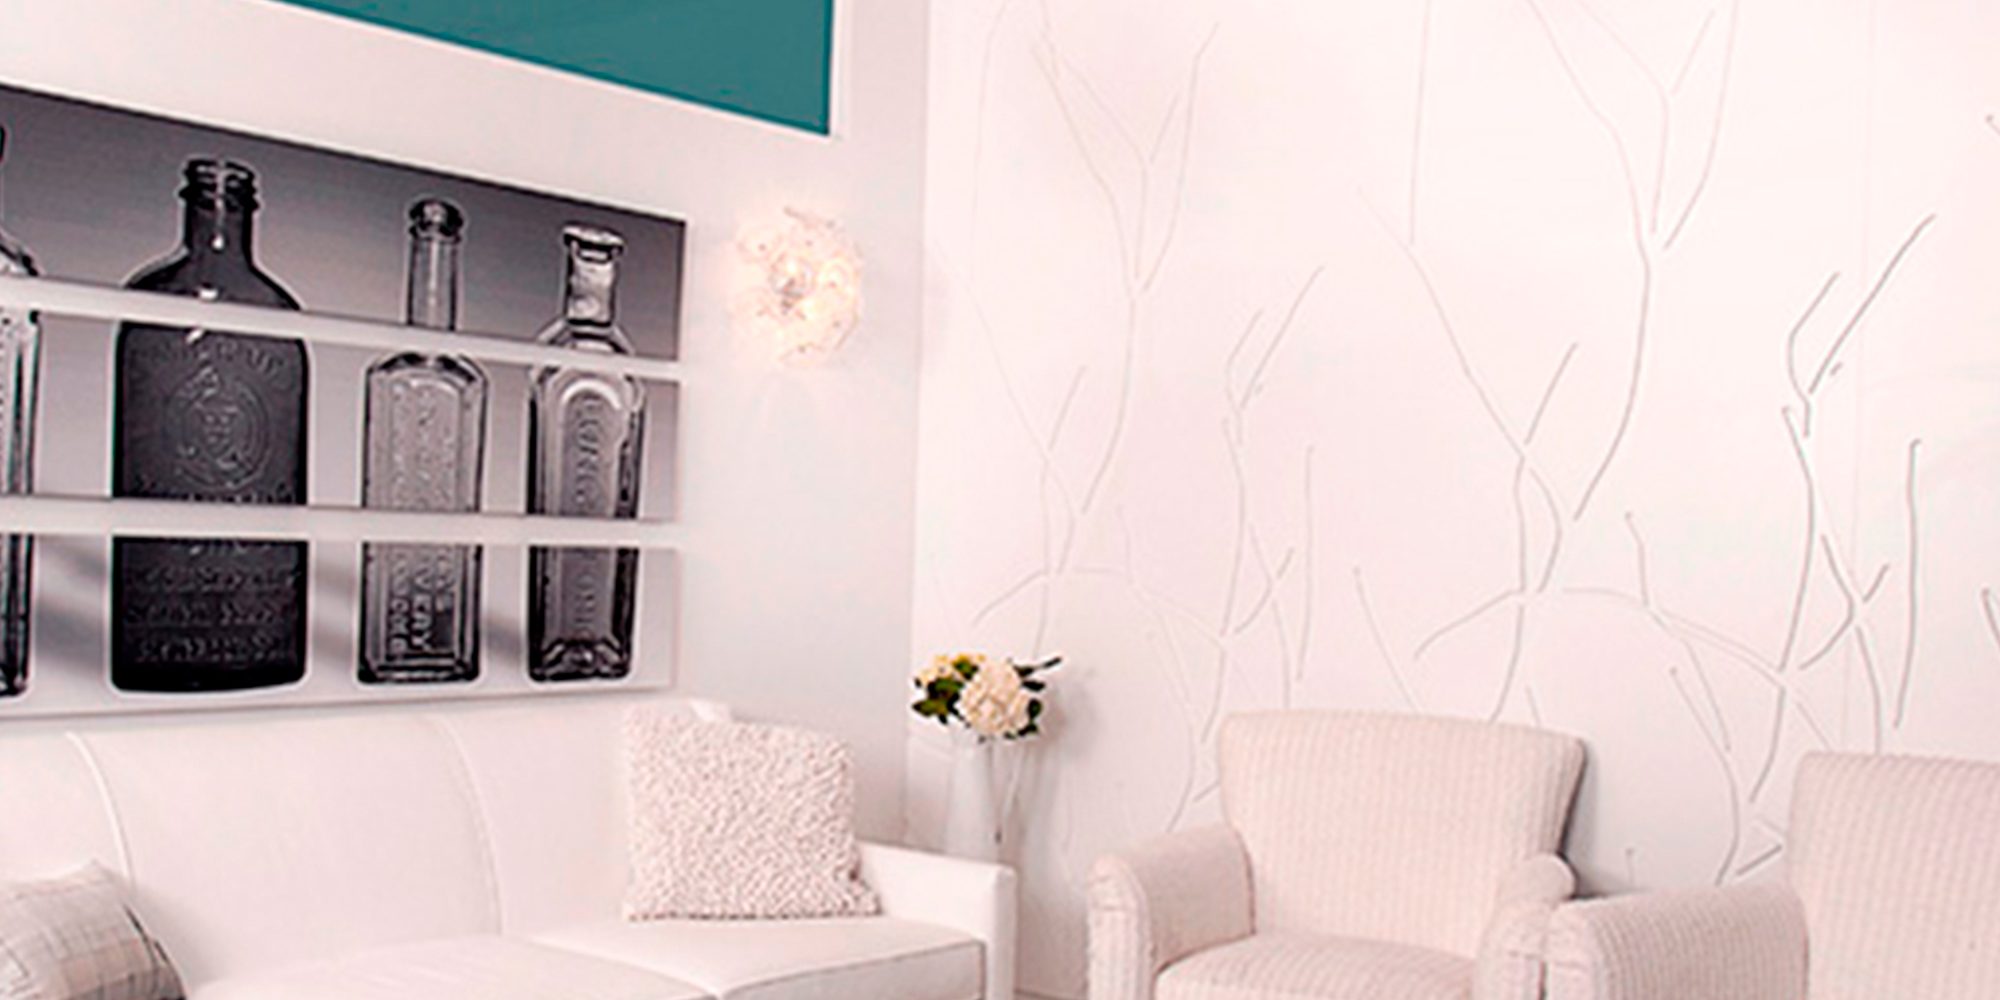 Cure Spa featured image clean modern commercial interior design